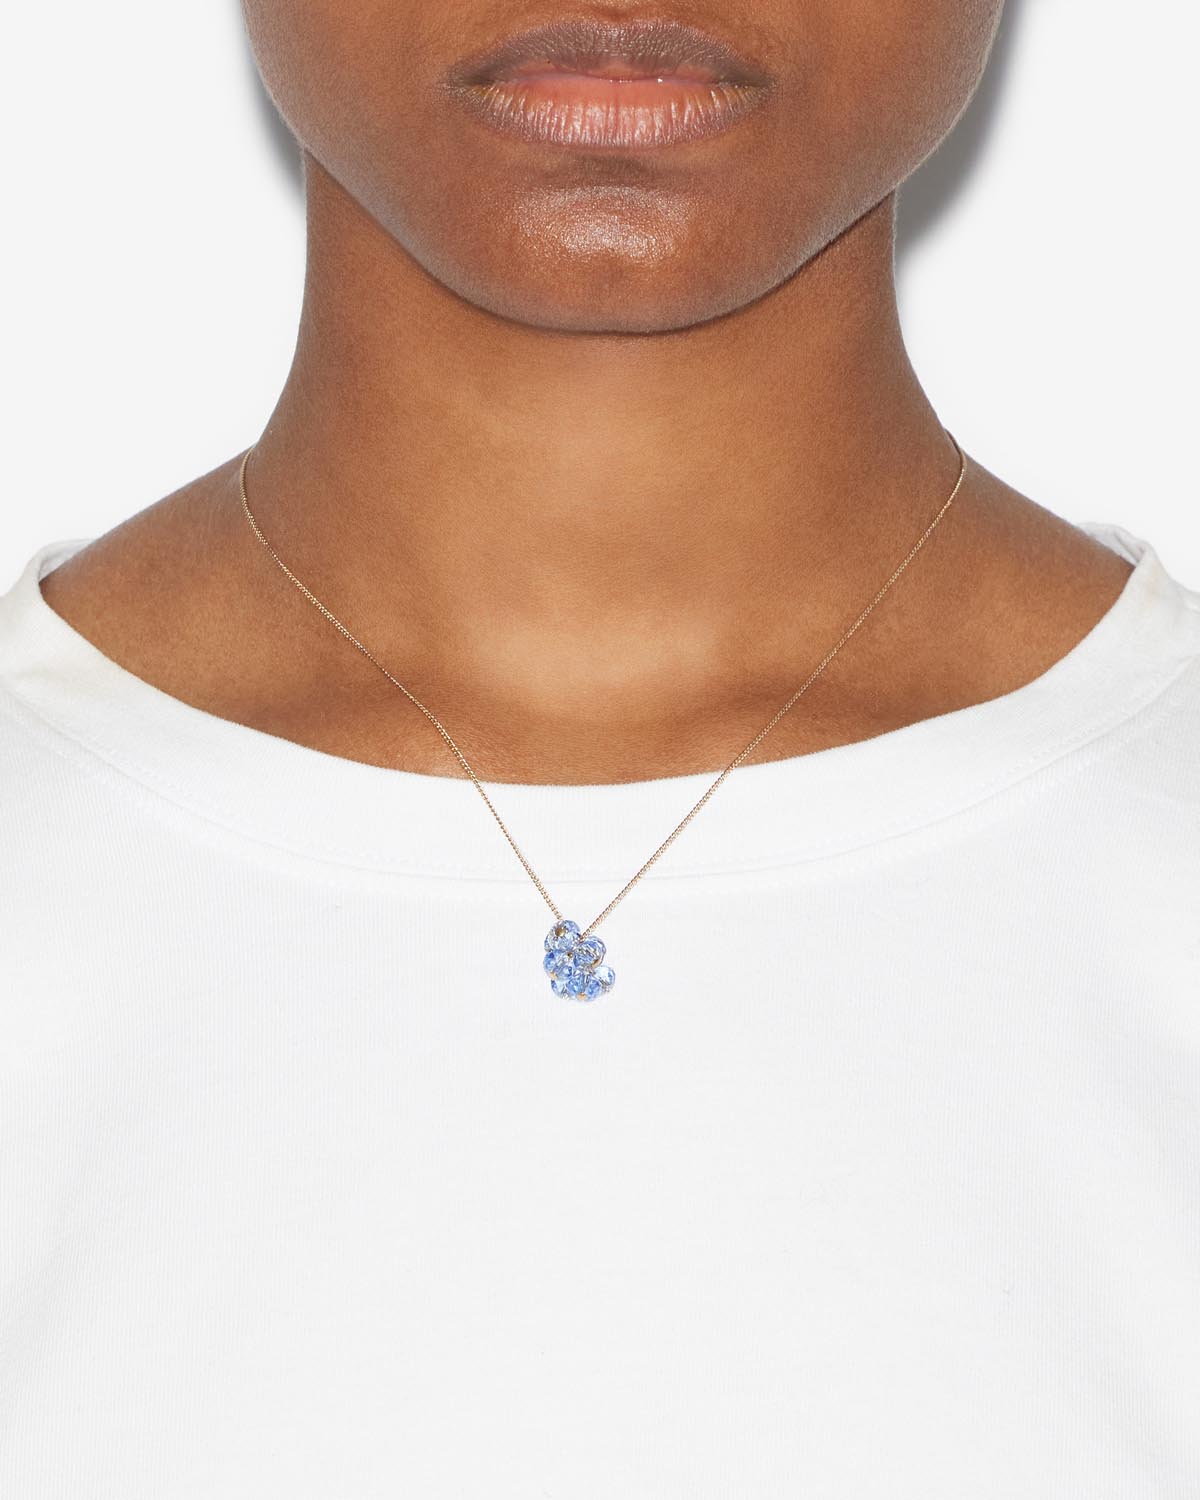 Polly necklace Woman Sky blue 1